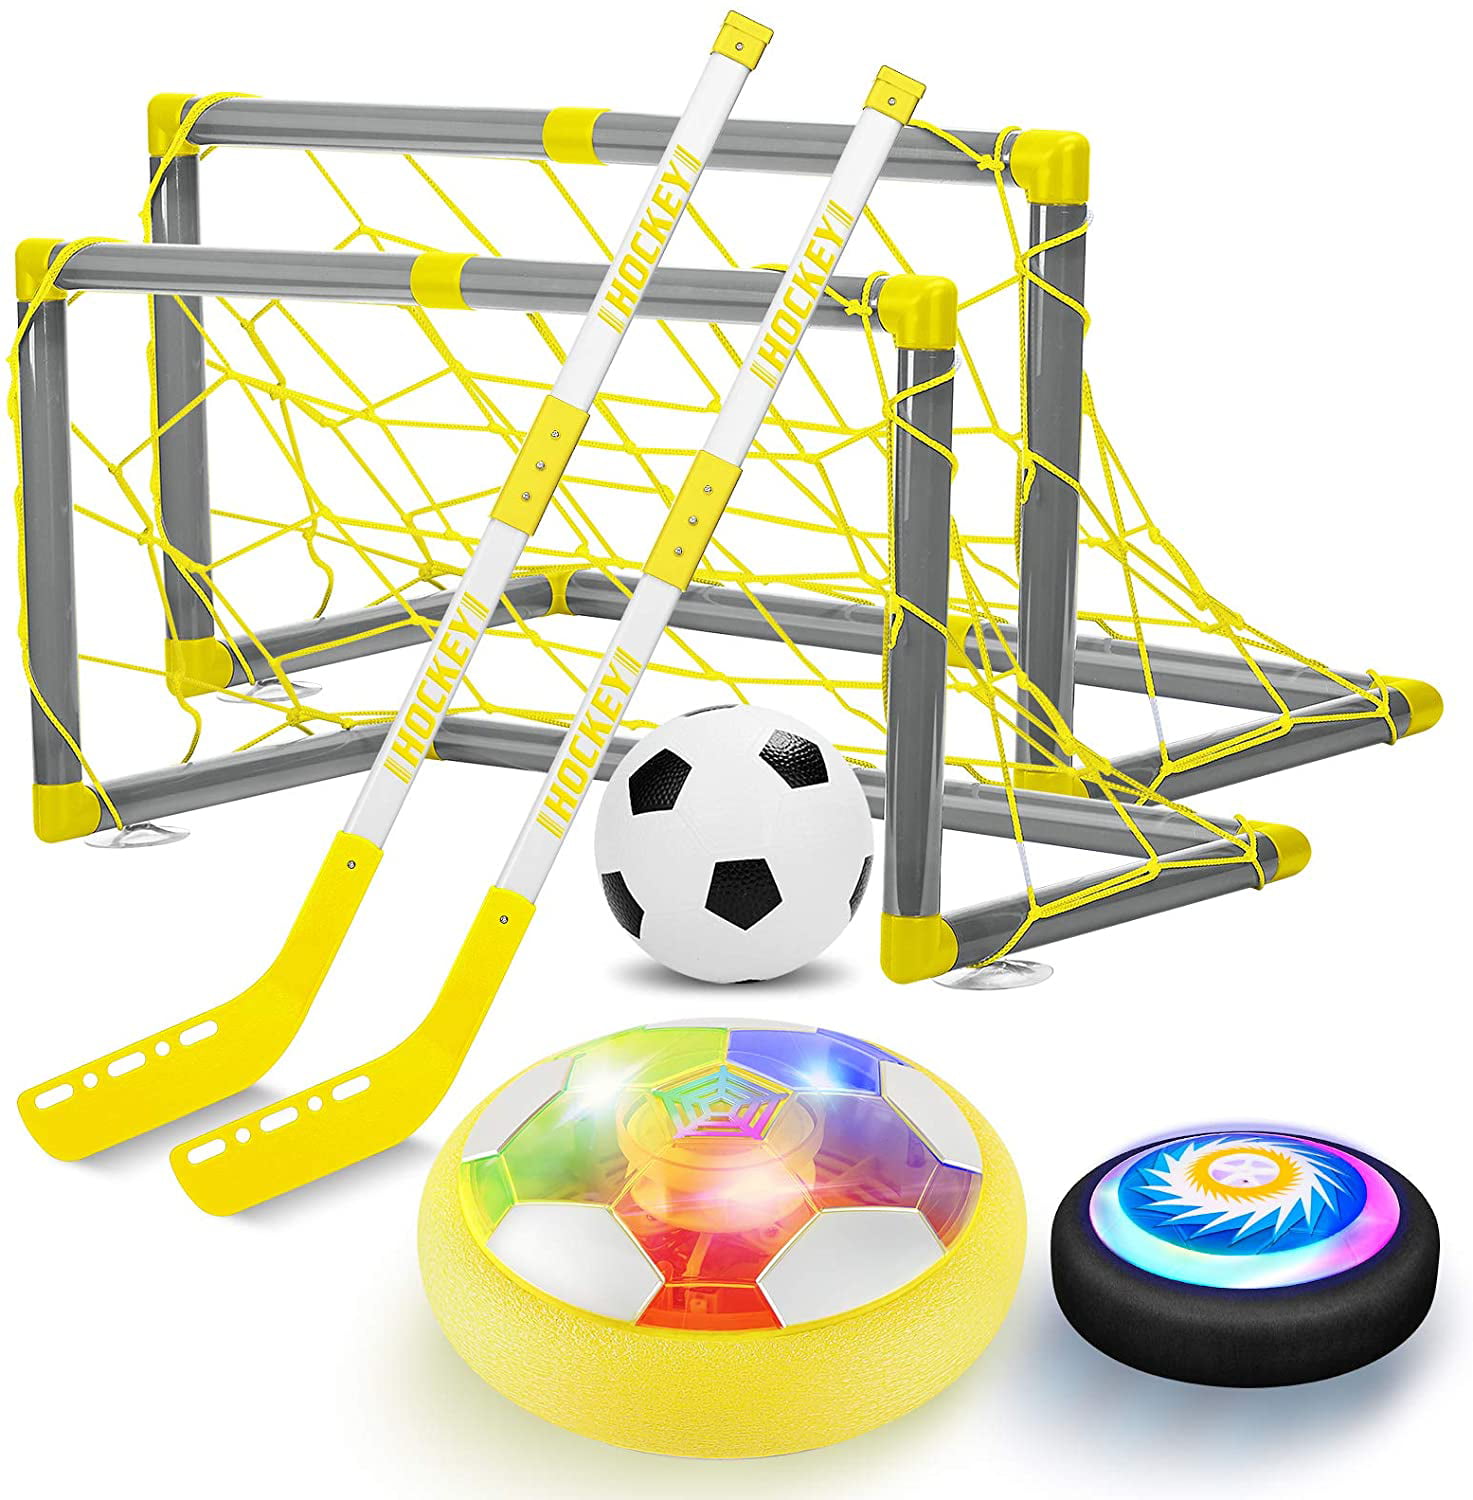 Air Shot LED Light Rechargeable EVA Bumper 2 Goals Indoor Outdoor Outside Floating Sports Games Gifts for 6-16 Boys Girls Teens Birthday Christmas 3in1 Hover Hockey Soccer Balls Kids Toys Set 